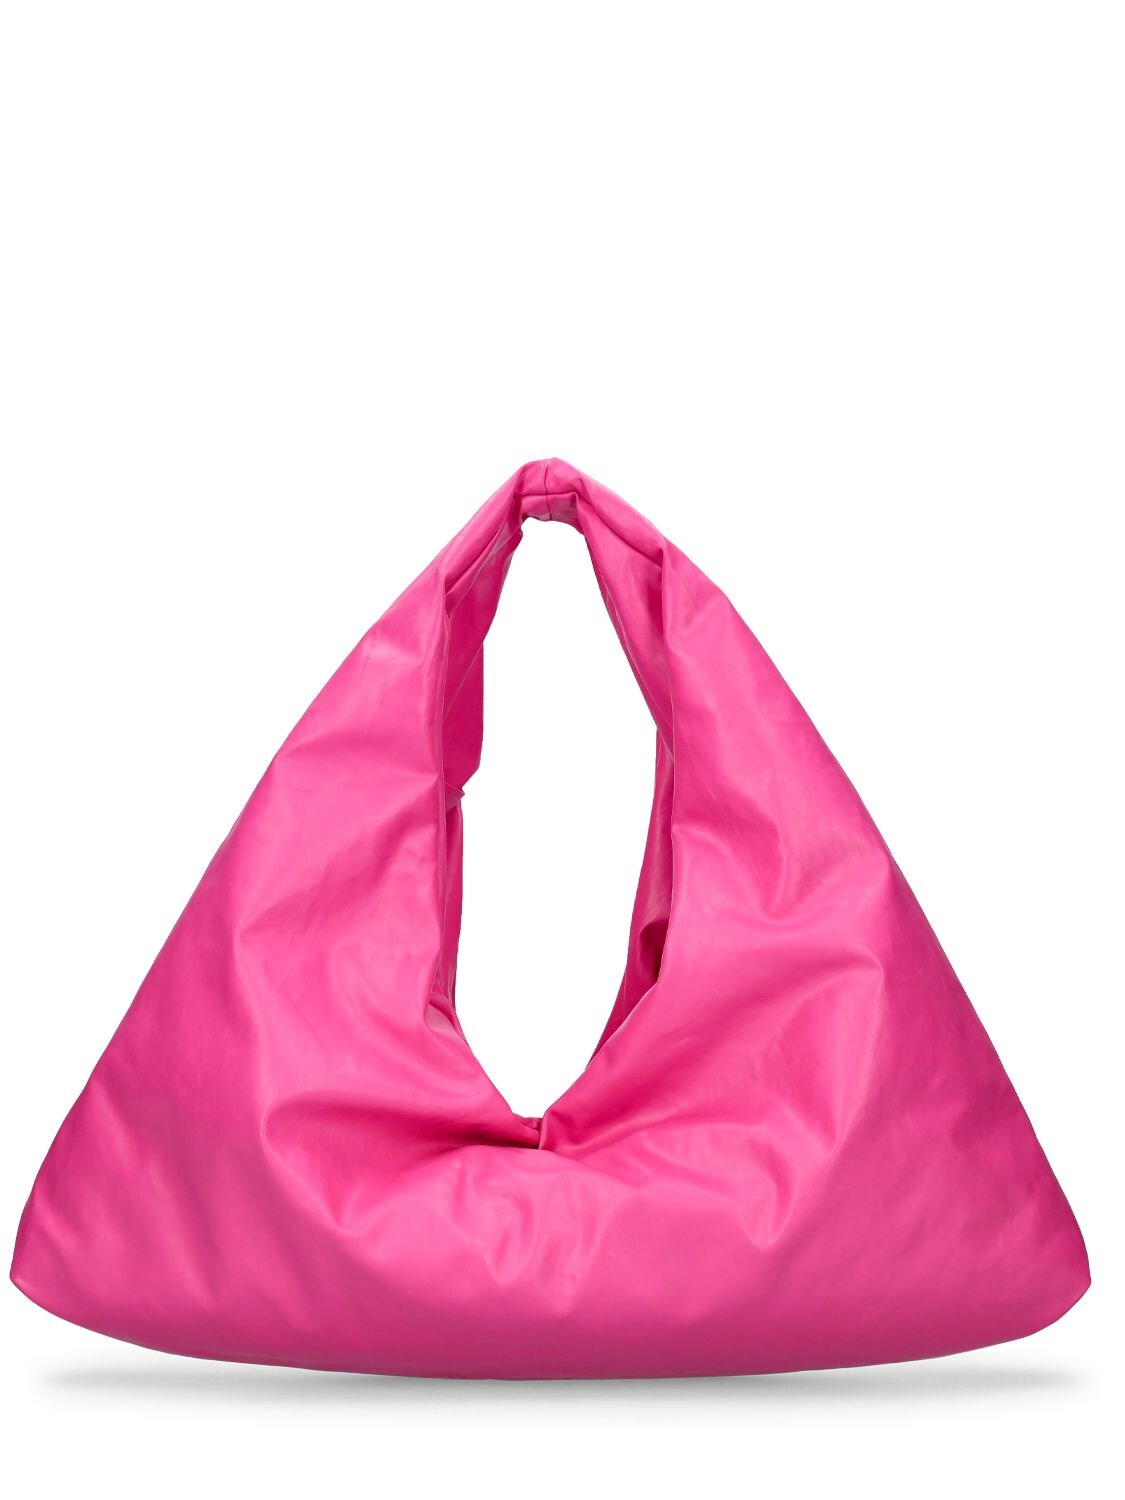 Kassl Editions Anchor Hand Small Oil Cotton Blend Bag In Bright Pink